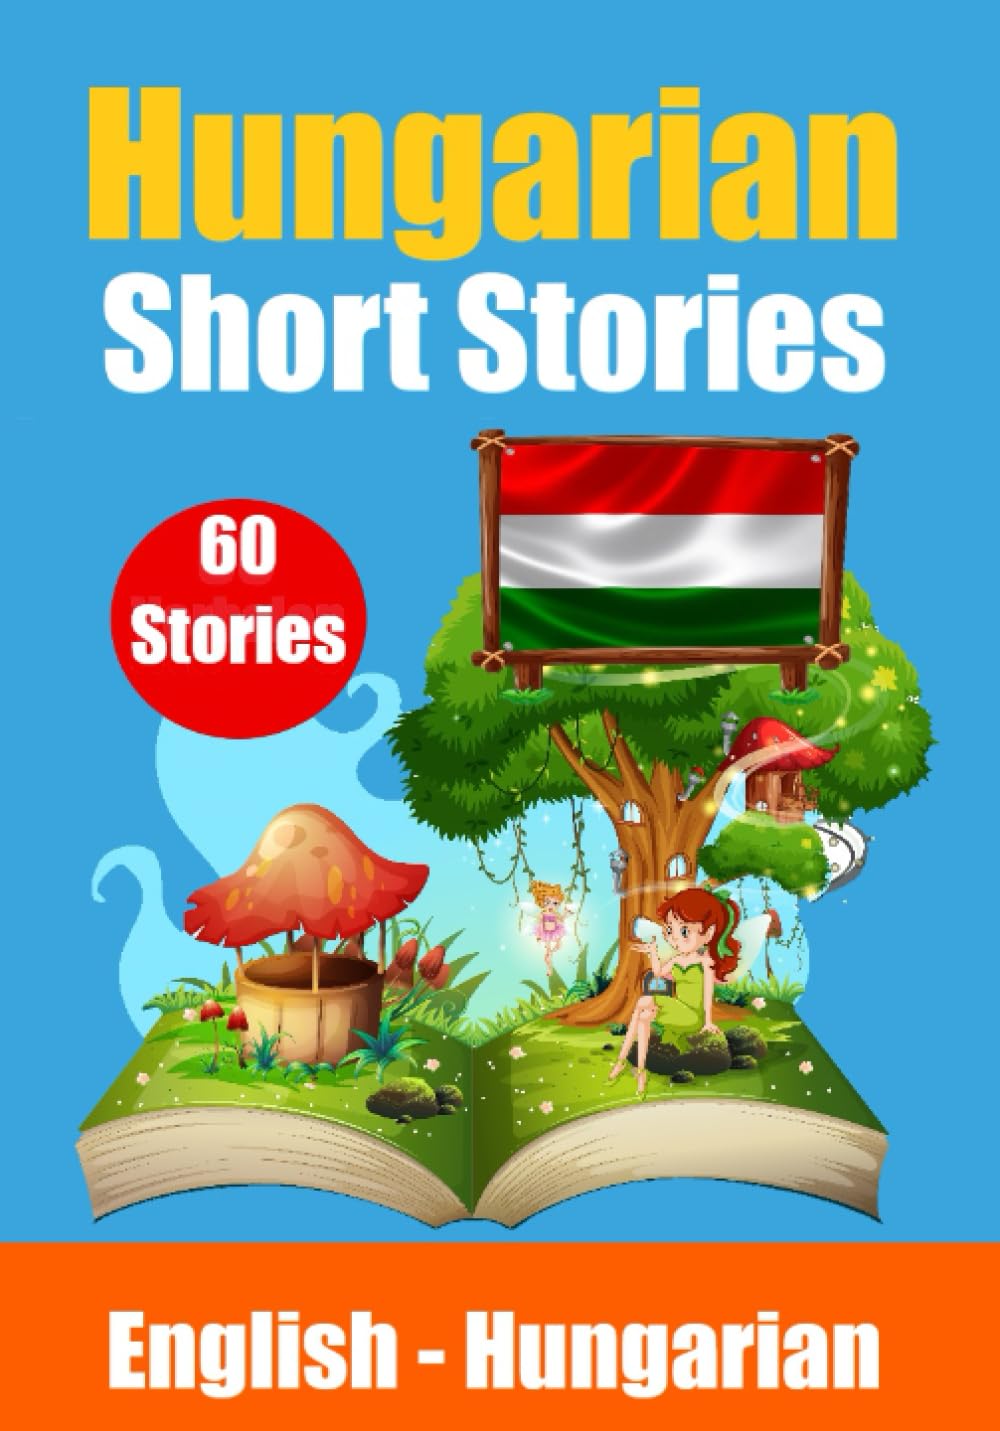 Short Stories in Hungarian | English and Hungarian Stories Side by Side: Learn the Hungarian Language | Hungarian Made Easy (Books for Learning Hungarian)